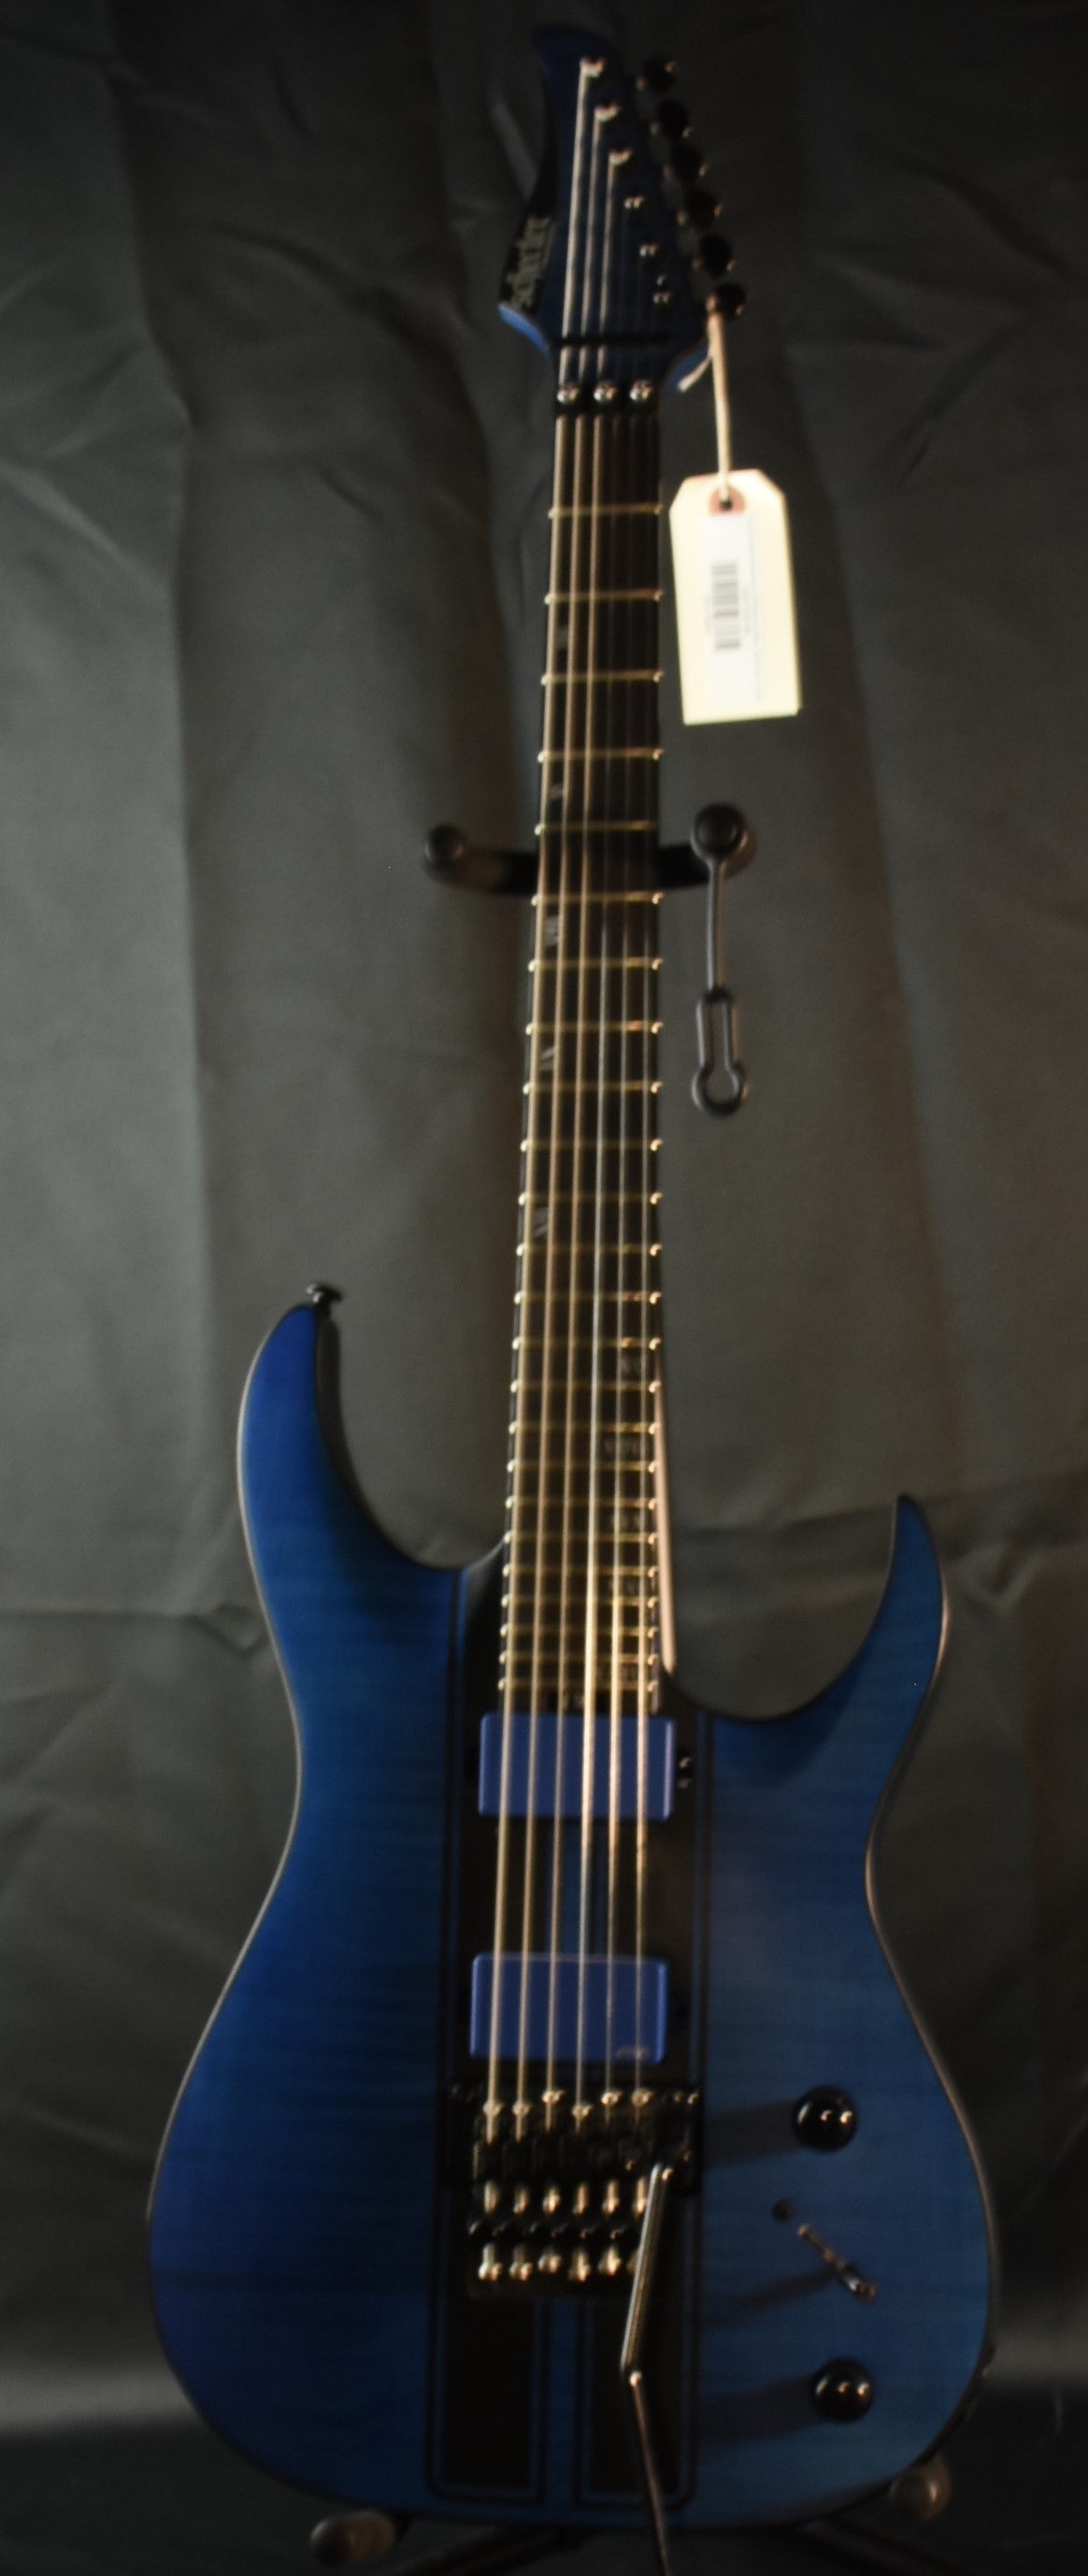 Used Schecter Banshee GTFR Electric Guitar - Blue Satin